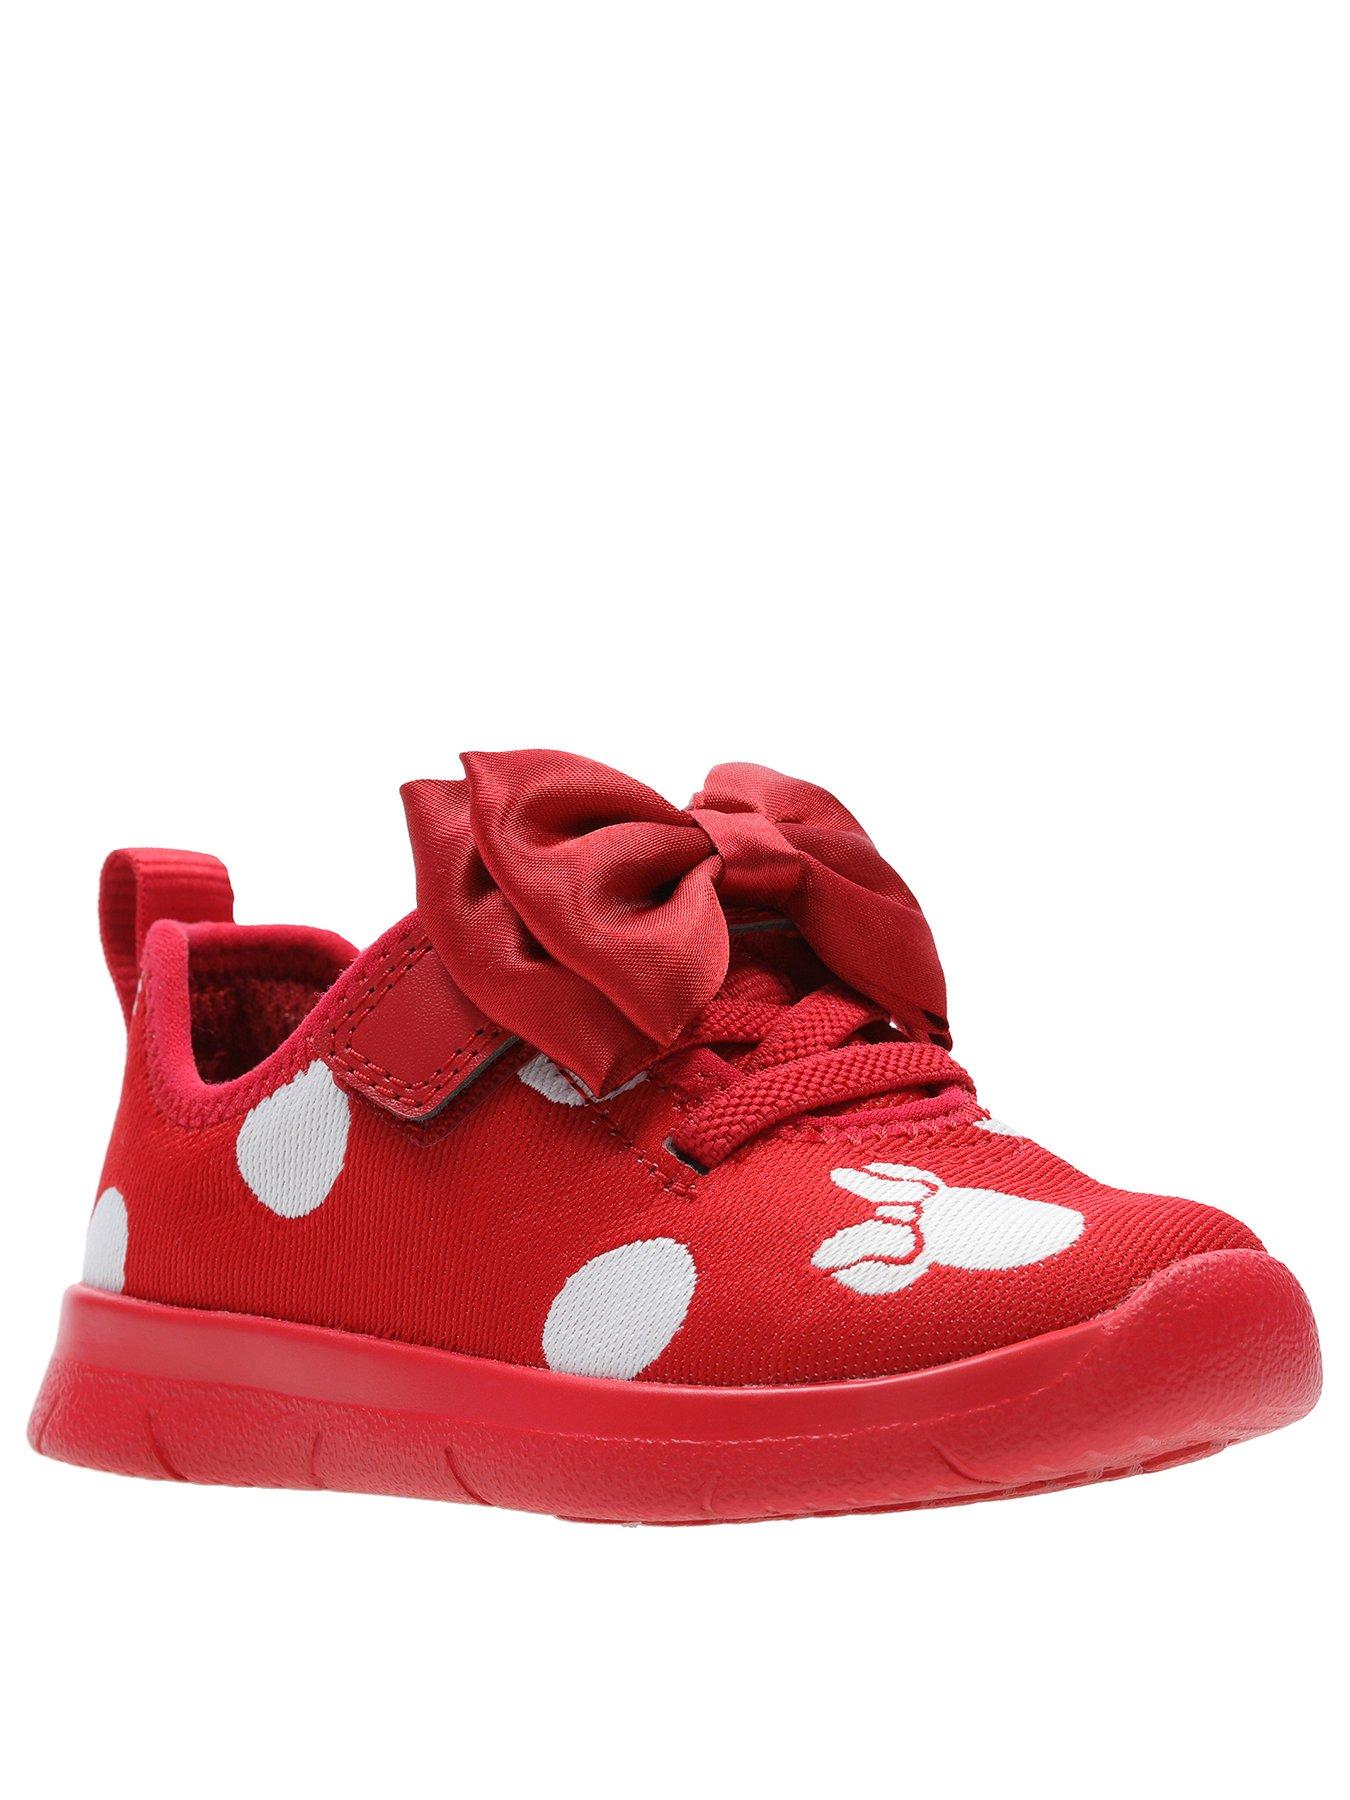 baby girl shoes clarks